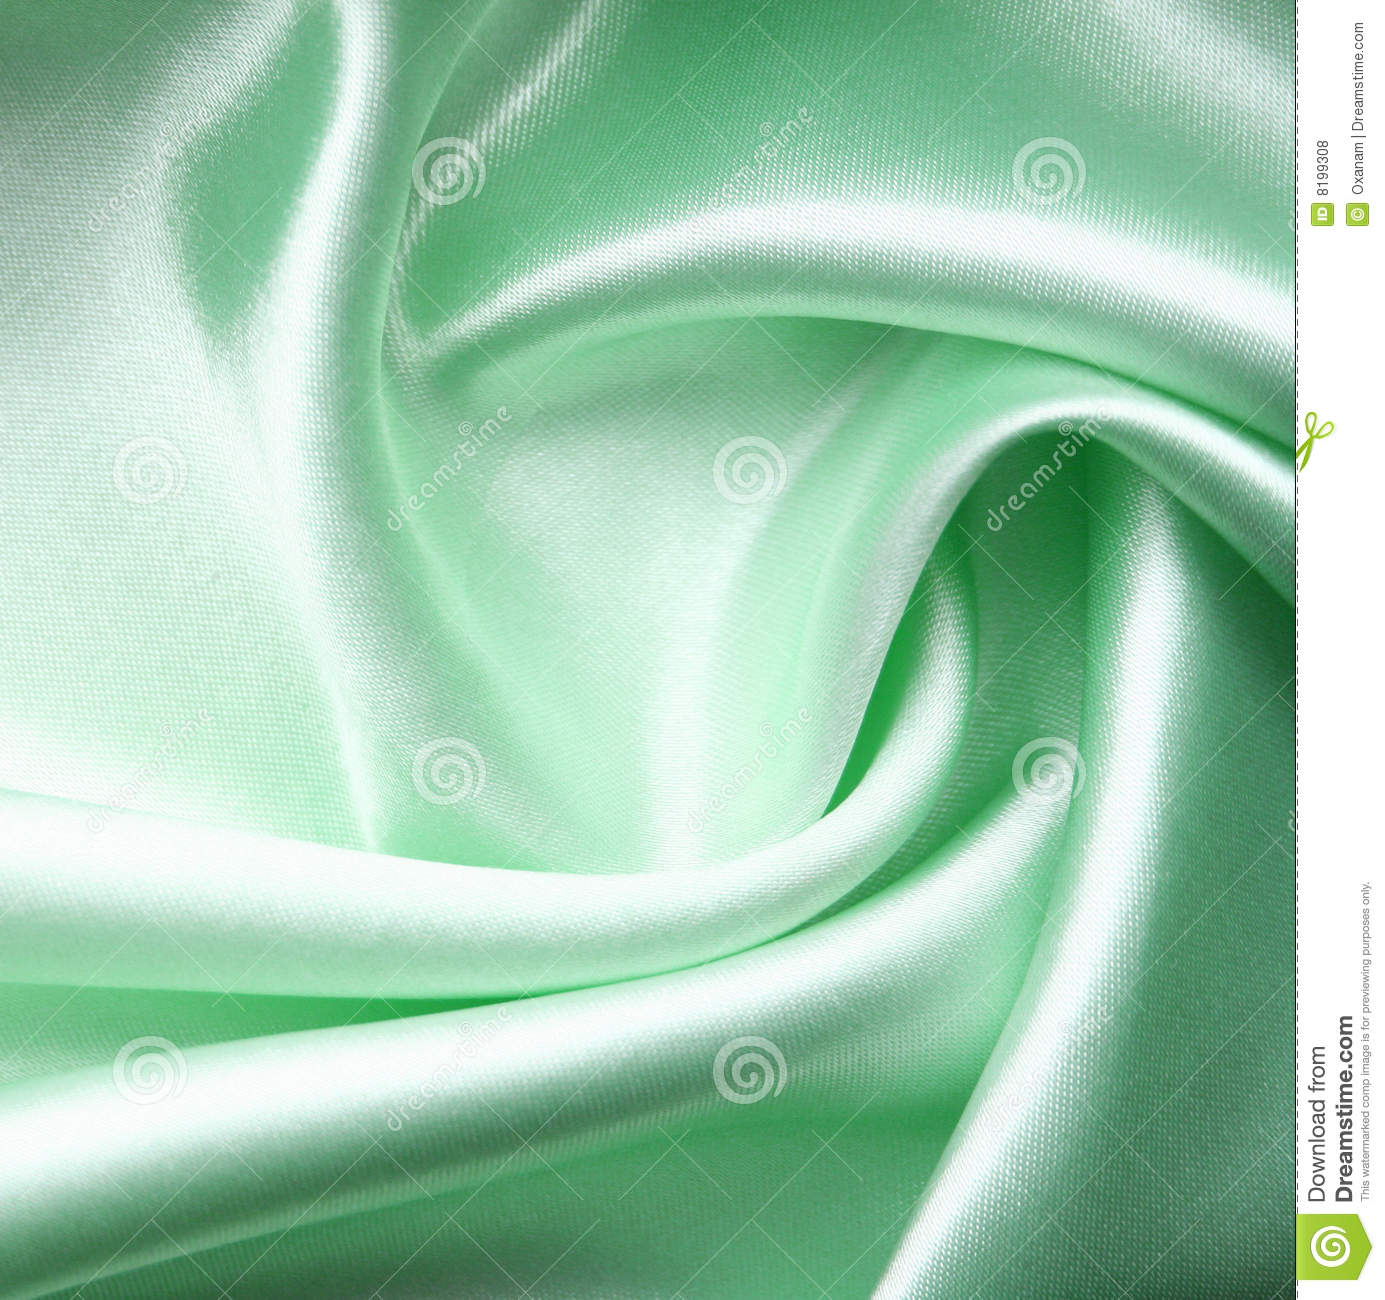 Download Smooth elegant green silk can use as background